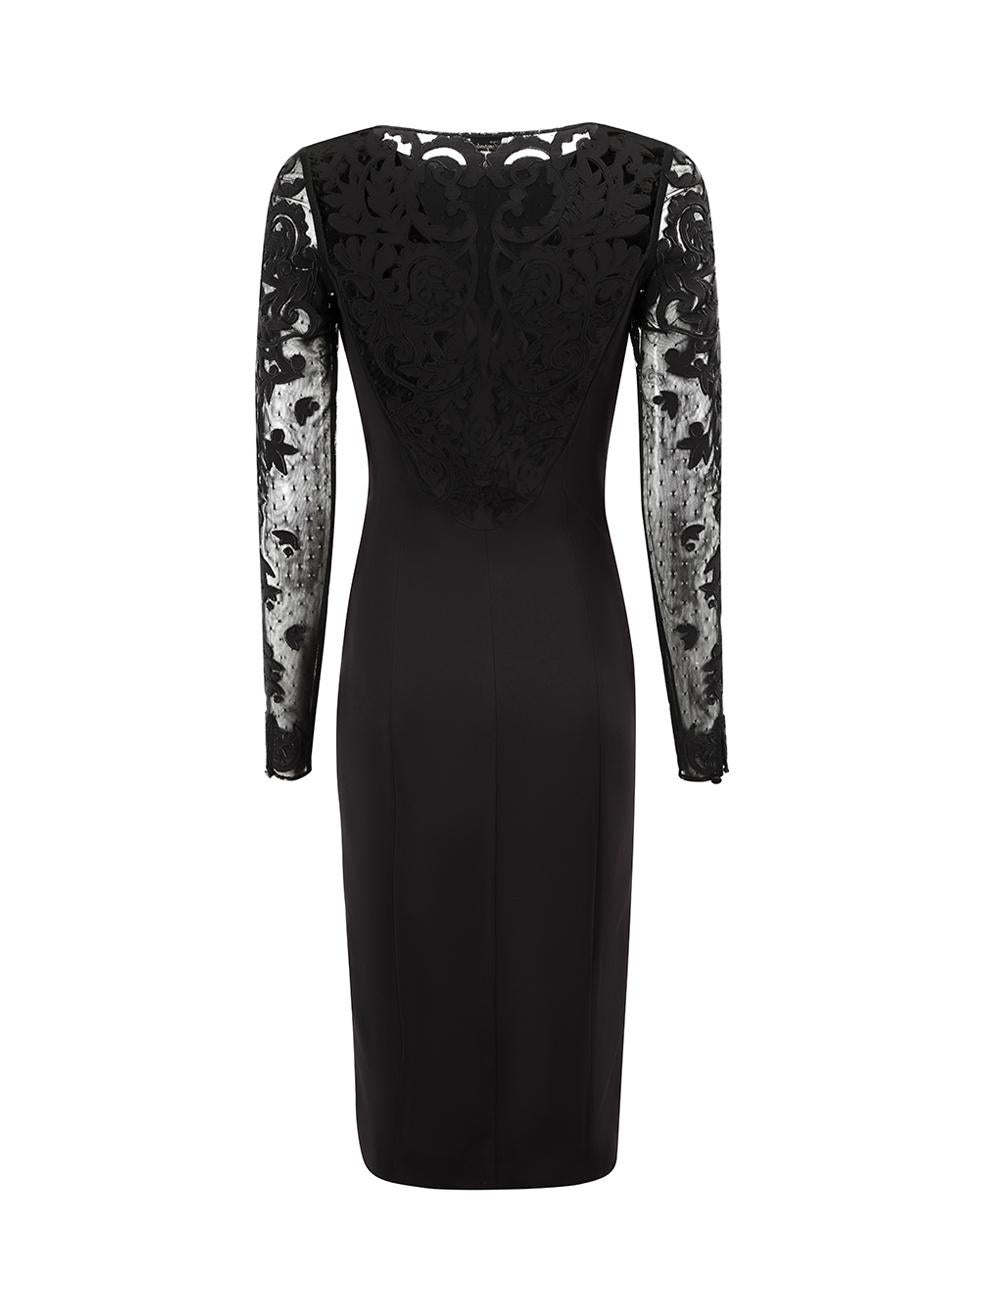 Black Lace Sheer Long Sleeves Knee Length Dress Size S In Good Condition For Sale In London, GB